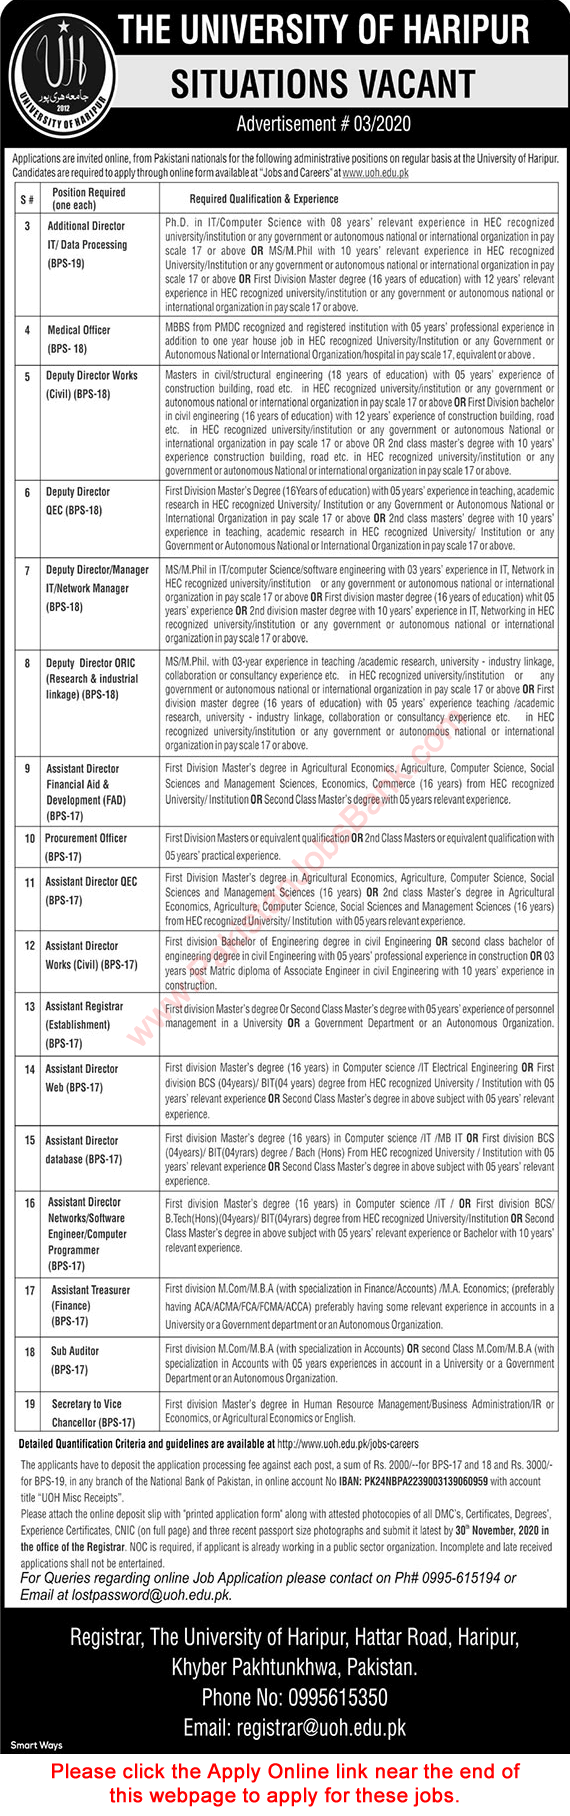 University of Haripur Jobs November 2020 Apply Online Assistant Directors & Others Latest